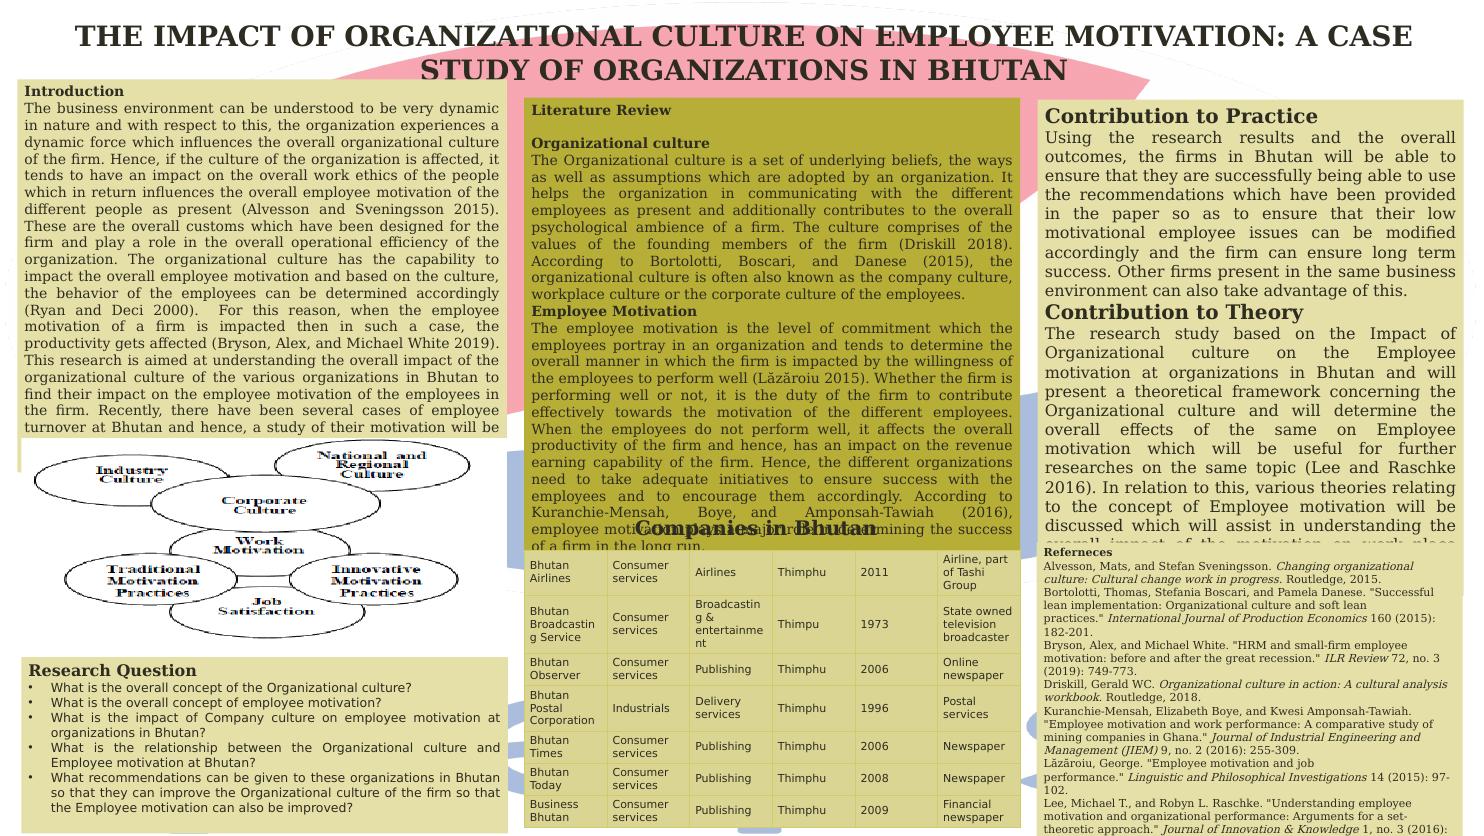 THE IMPACT OF ORGANIZATIONAL CULTURE ON EMPLOYEE MOTIVATION_1